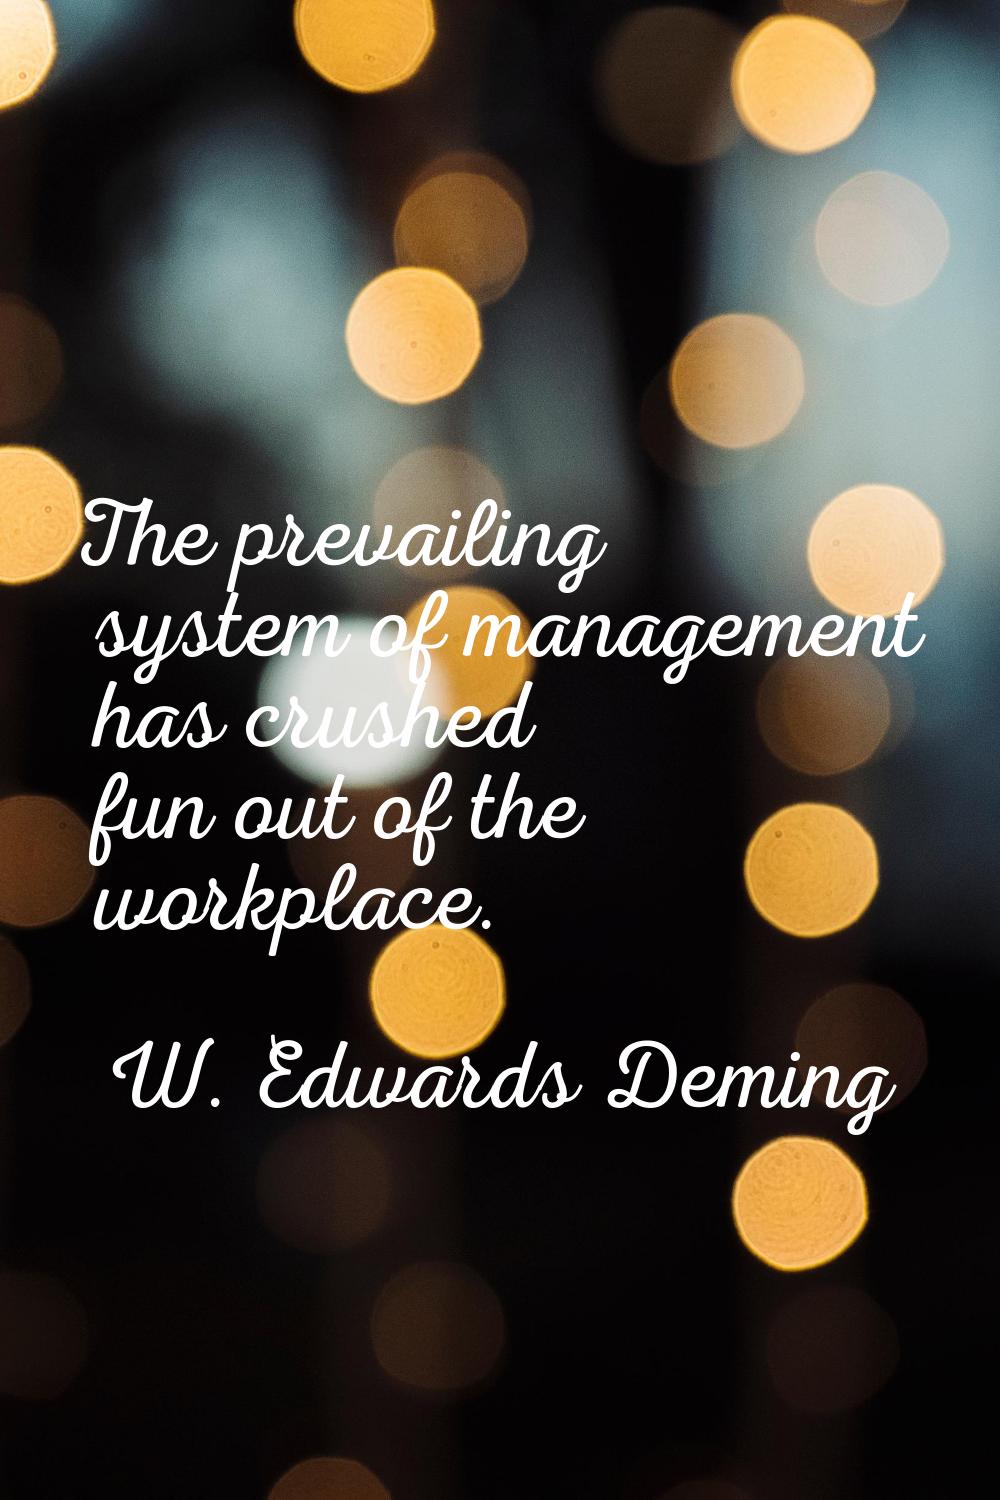 The prevailing system of management has crushed fun out of the workplace.